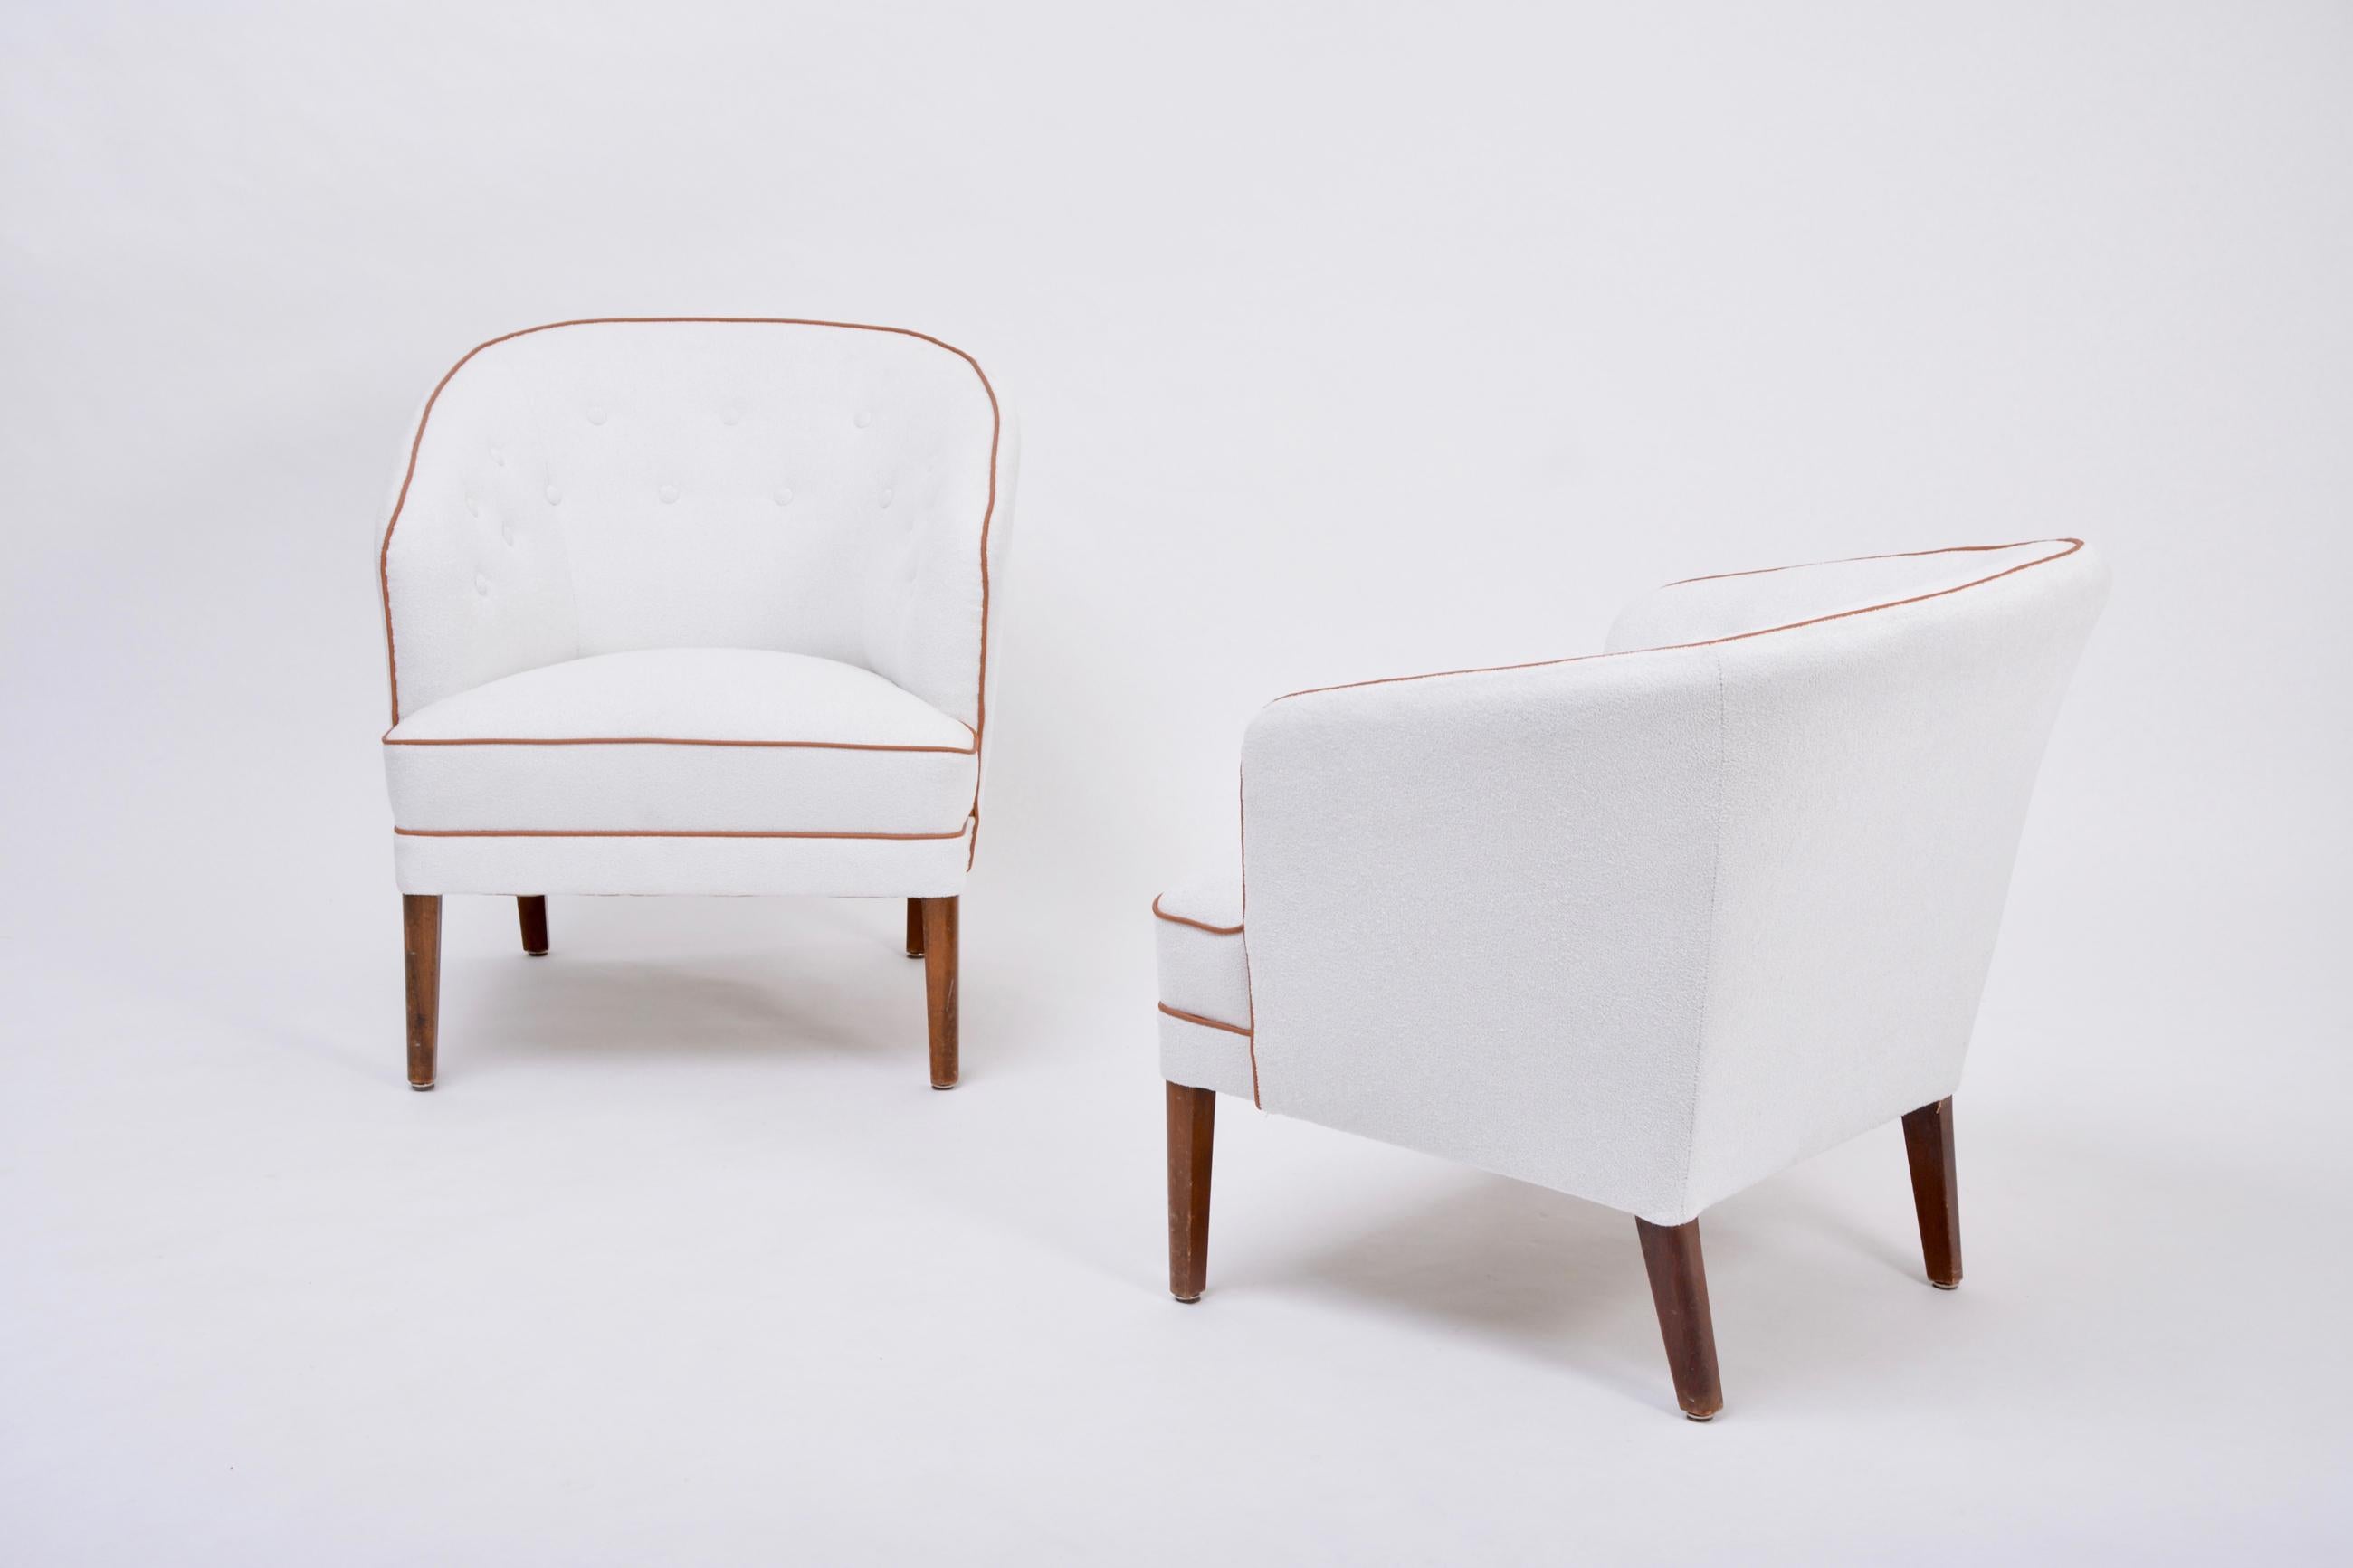 Pair of White Reupholstered Danish Mid-Century Armchairs by Ludvig Pontoppidan In Good Condition For Sale In Berlin, DE